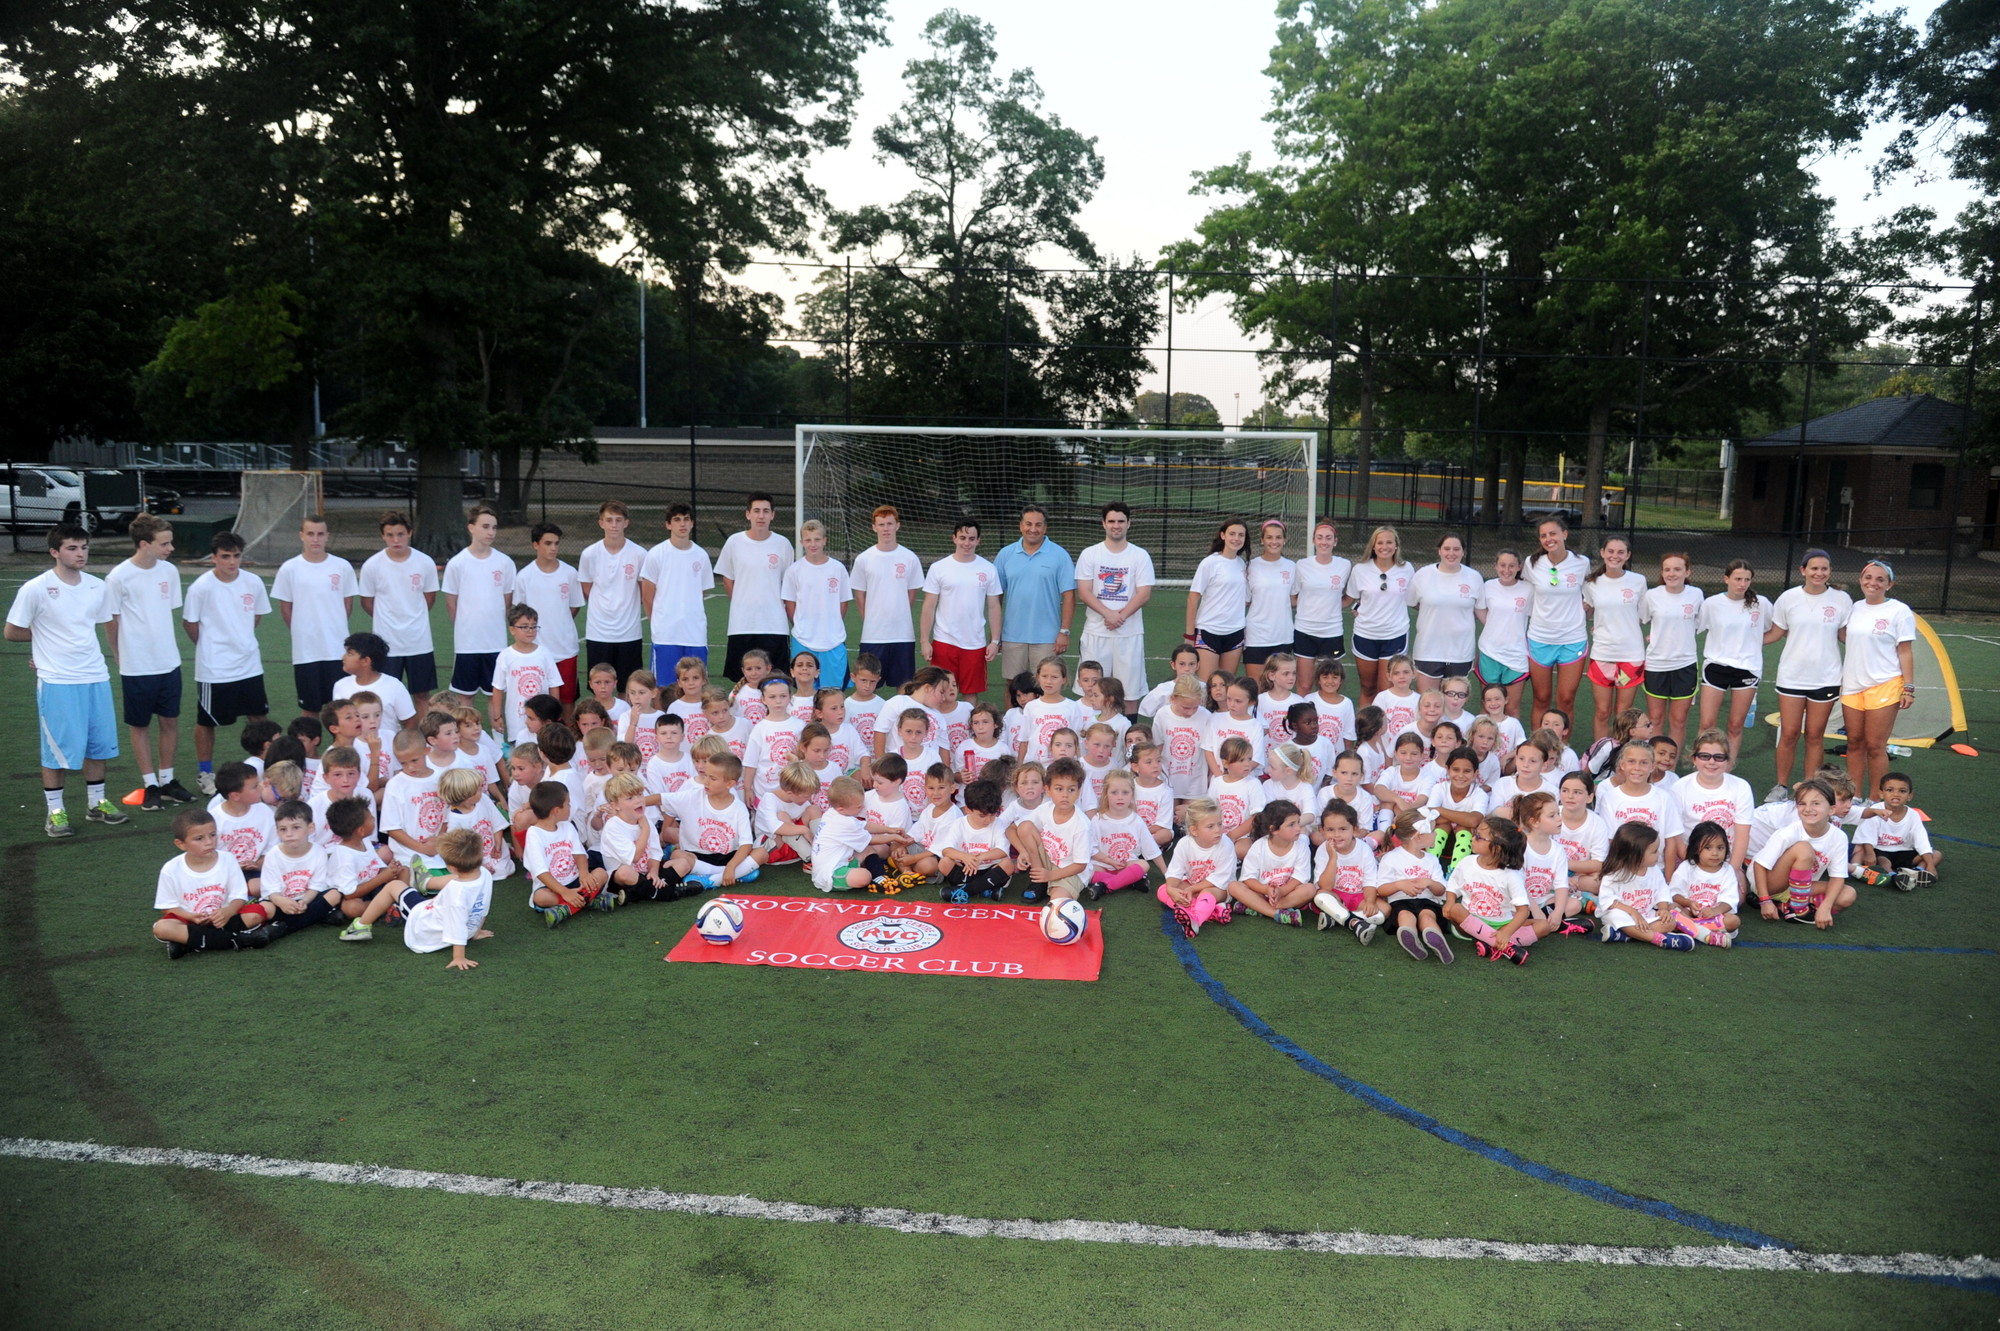 Many athletes from the Rockville Centre Soccer club, new and experienced, gathered for the annual event.